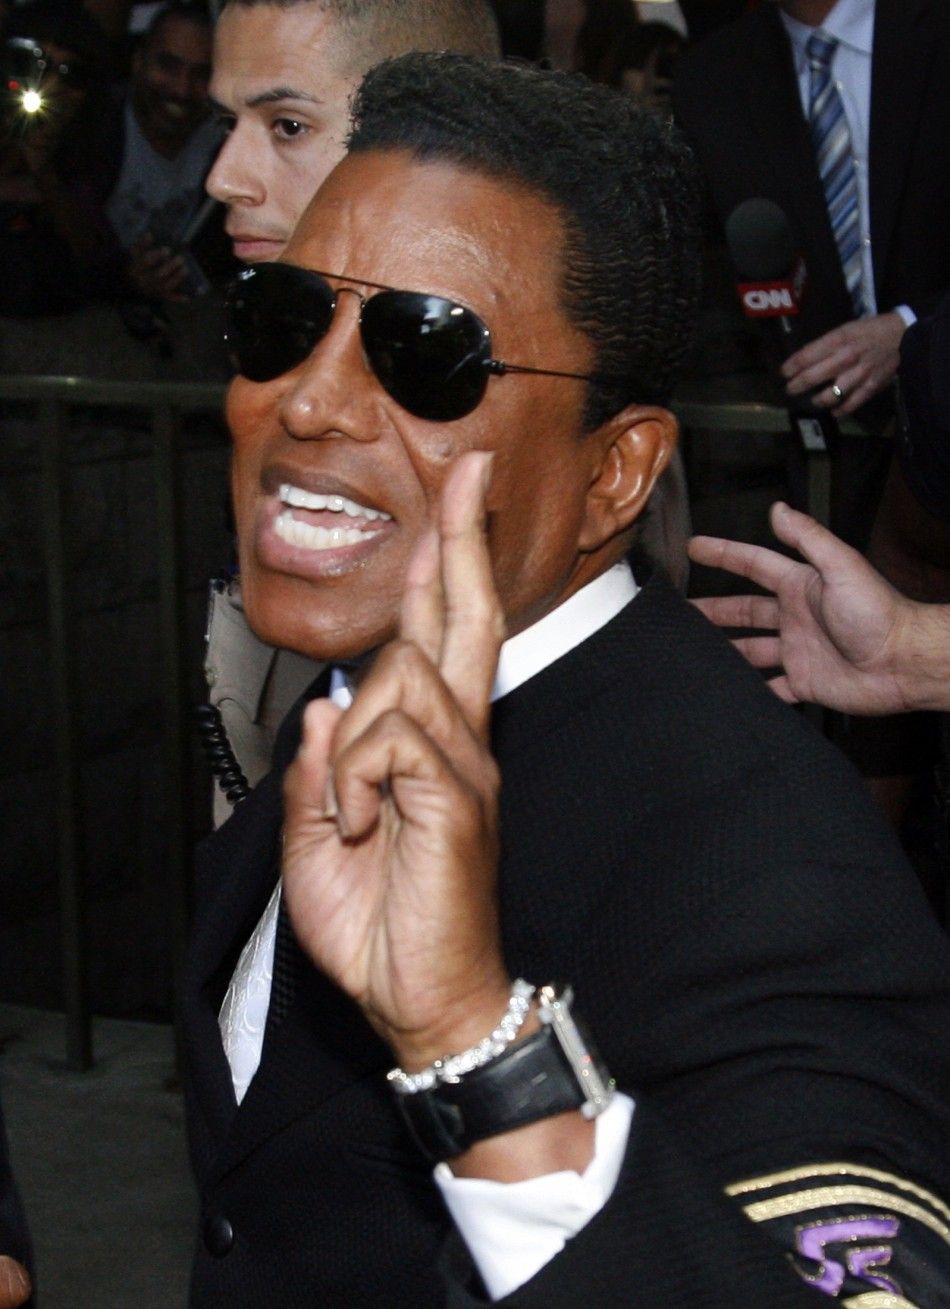 Michael Jacksons brother Jermaine Jackson leaves the courthouse with his fingers crossed after the reading of the guilty verdict in Dr. Conrad Murrays trial in Los Angeles